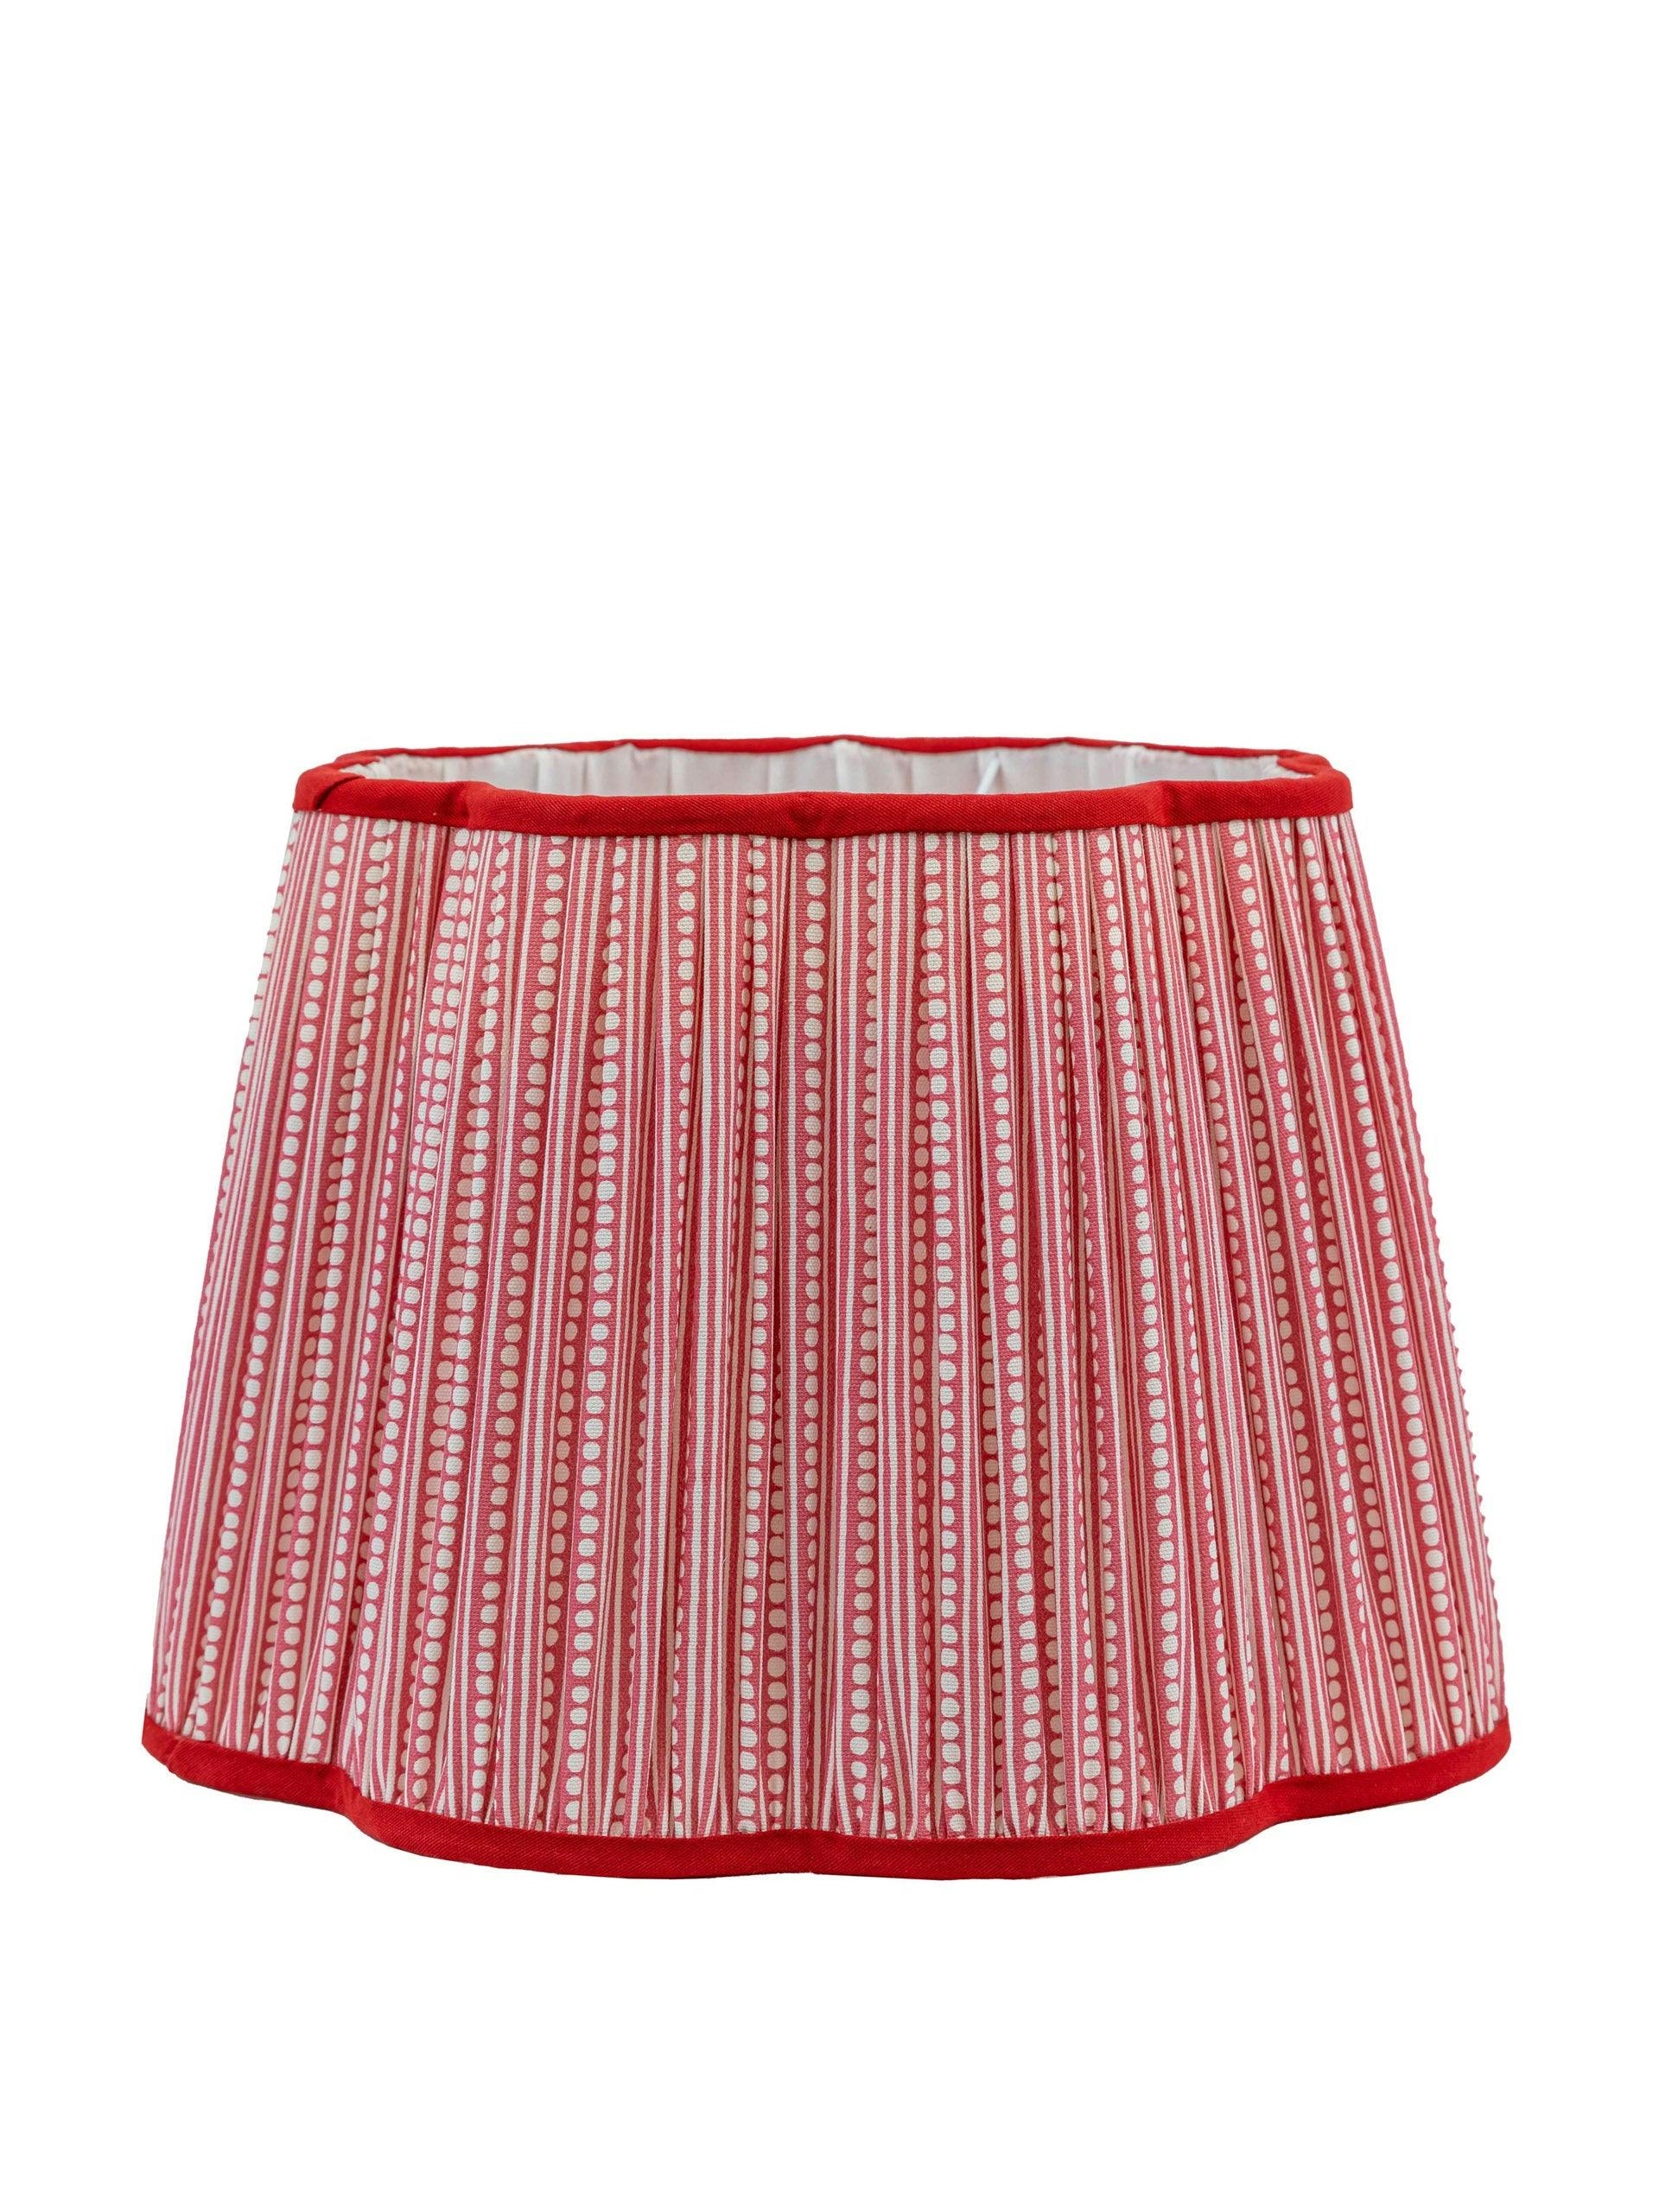 Pink and red printed scallop lampshade